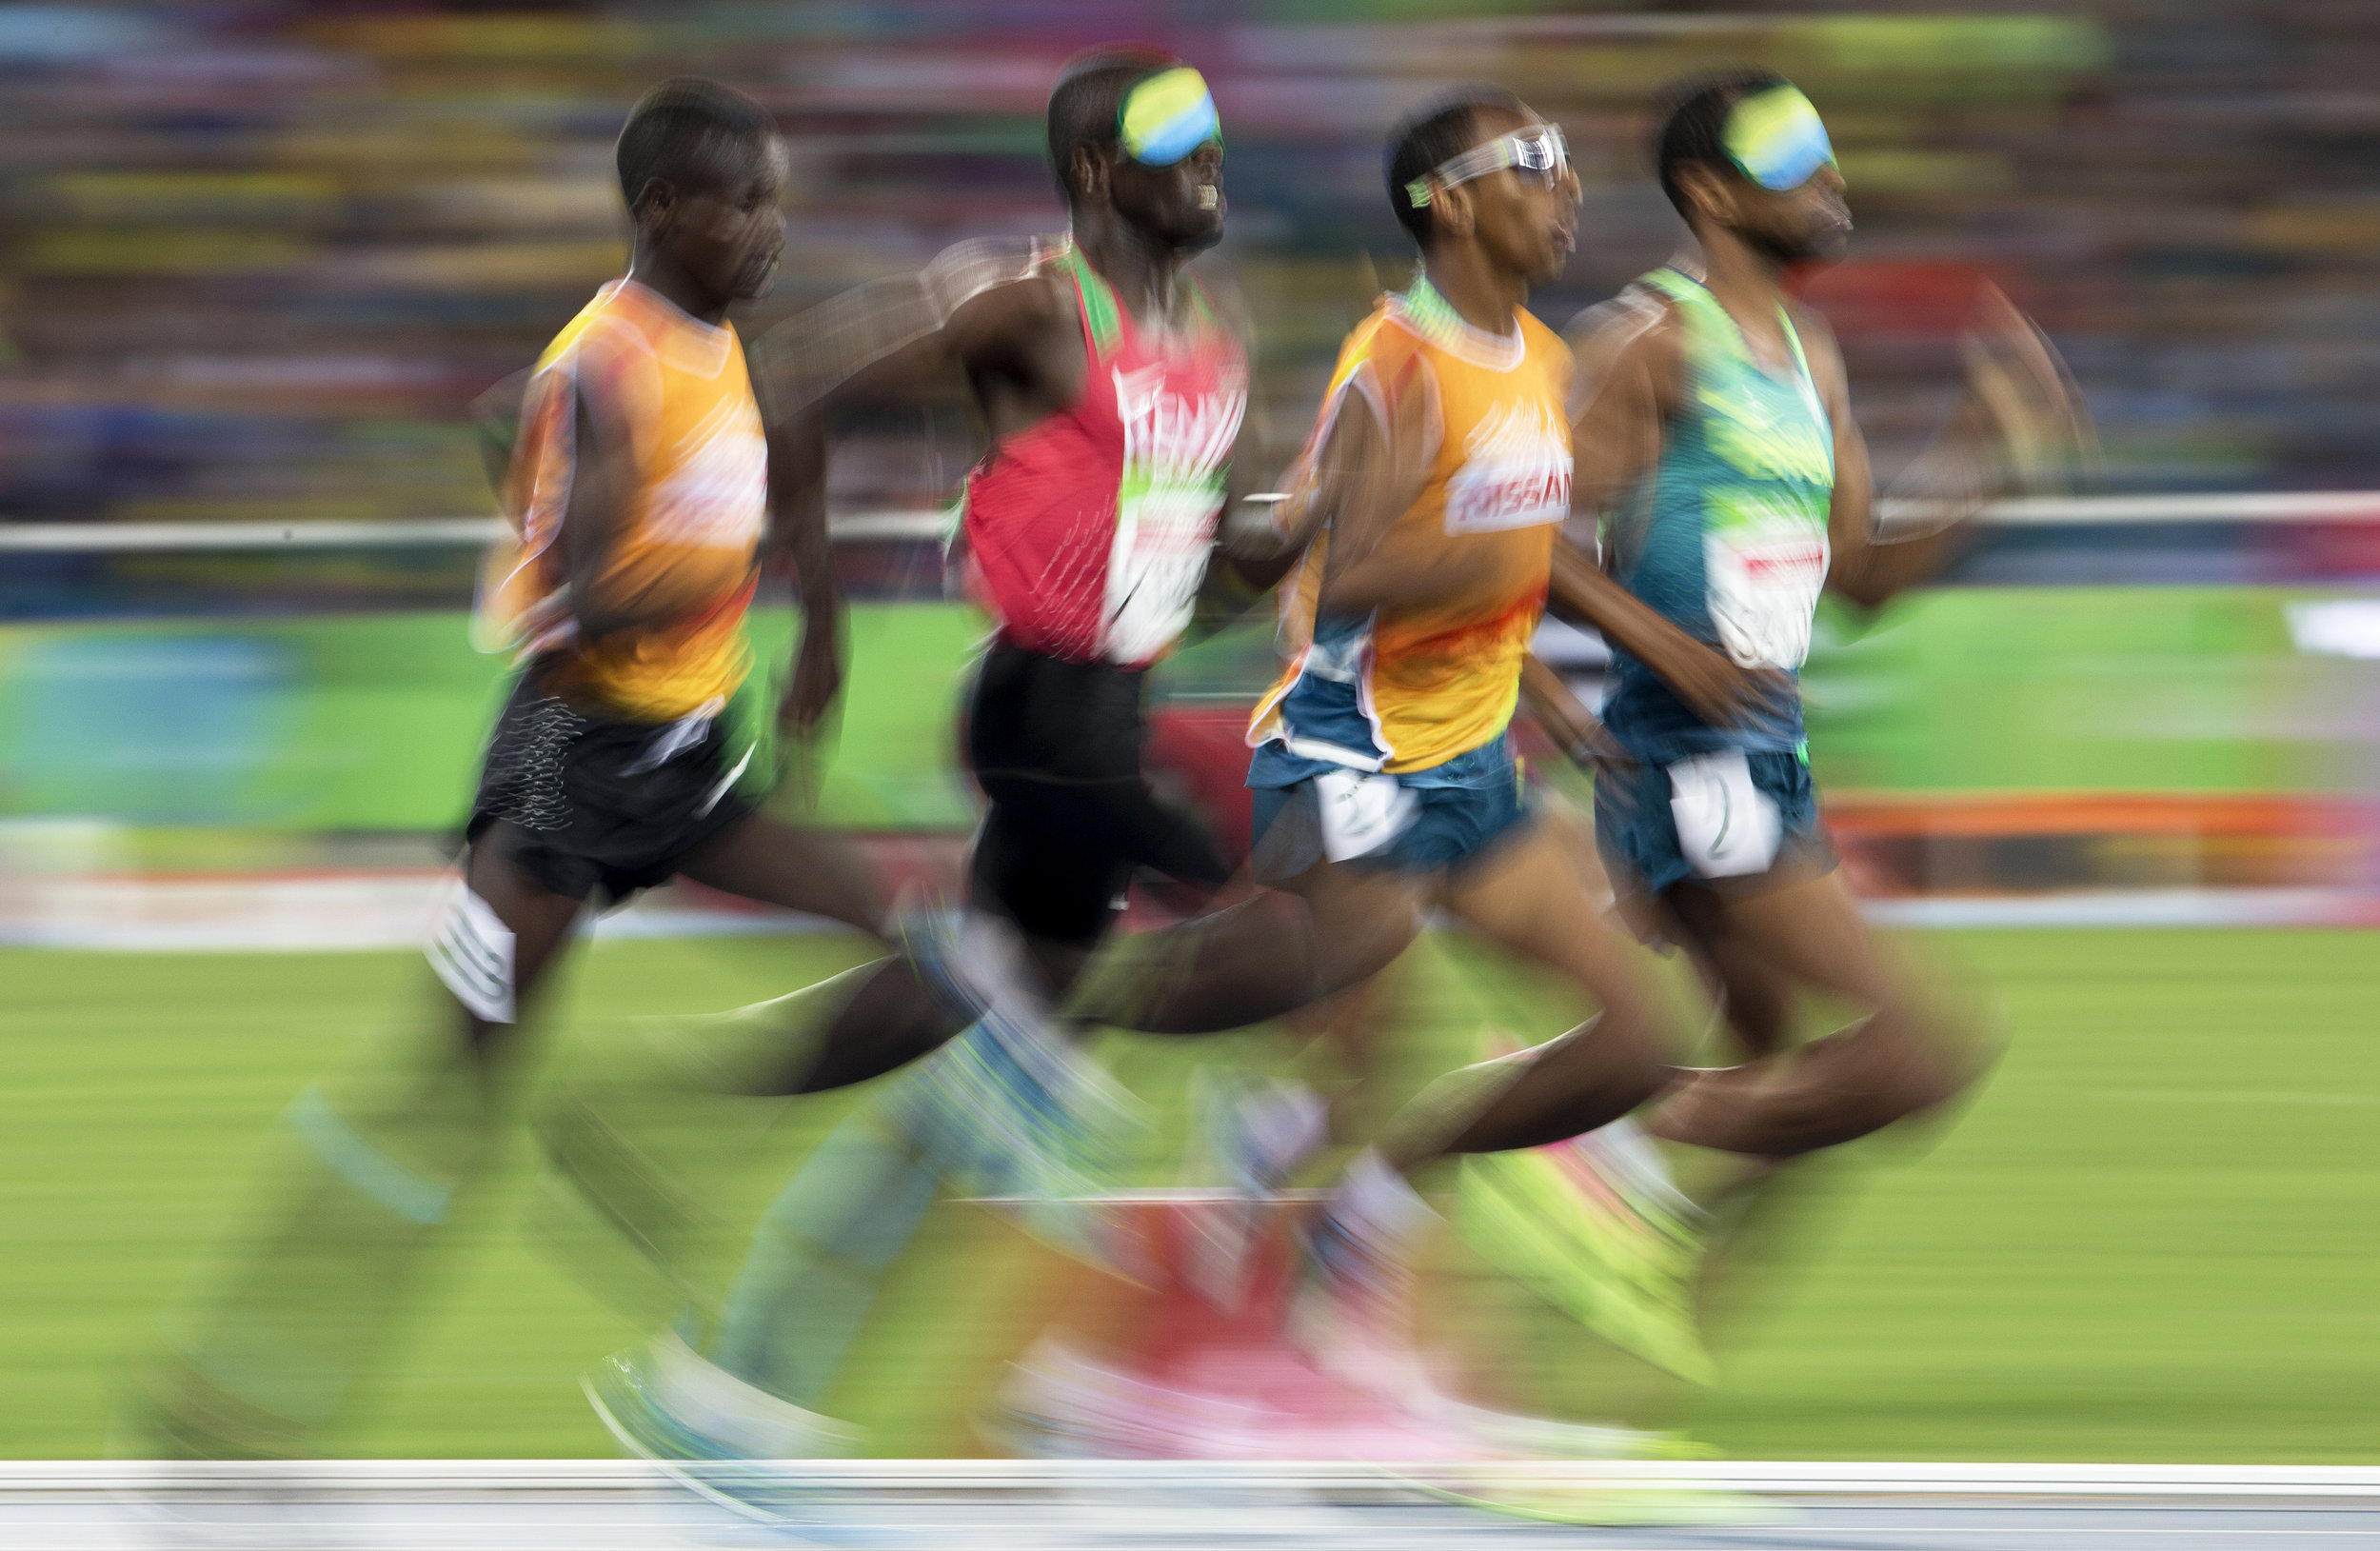  Odair Santos, far right, and Samwel Mushai Kimani, second left, battle it out for gold during the men’s 1500m final at the 2016 Paralympic Games in Rio de Janeiro, Brazil, on Tuesday, Sept. 13, 2016. Samwel Mushai Kimani and his guide James Boit won